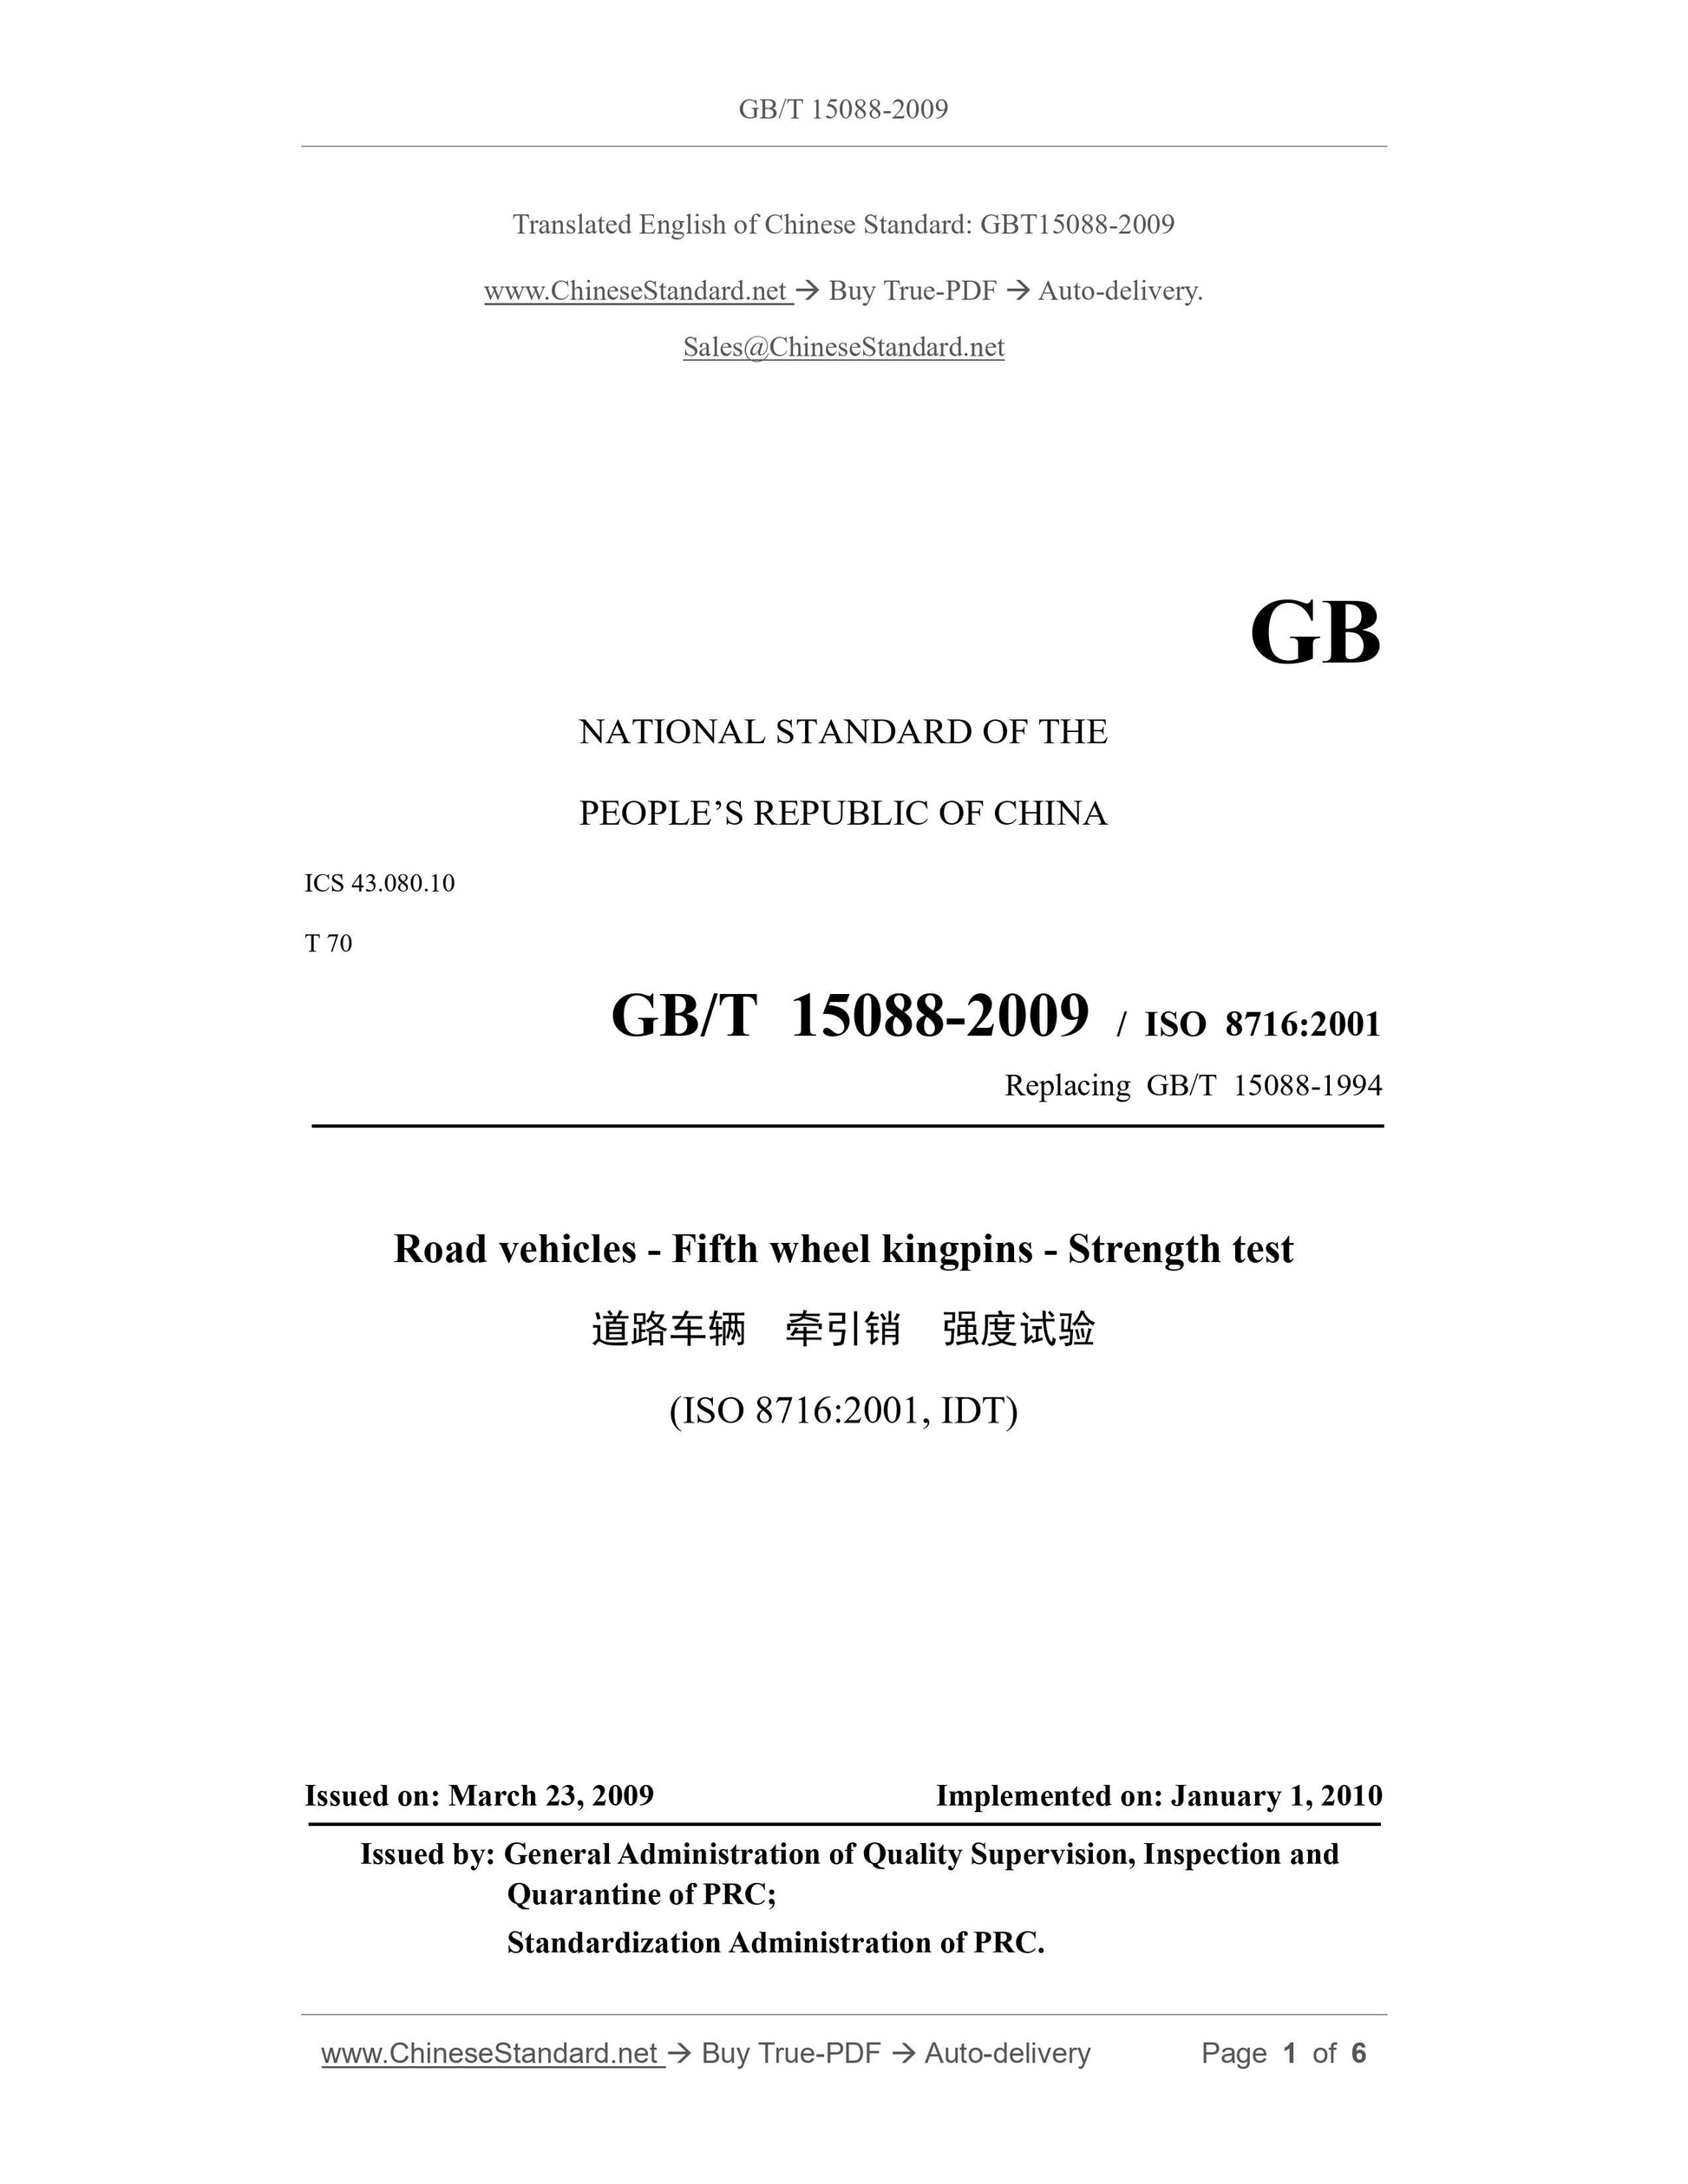 GB/T 15088-2009 Page 1